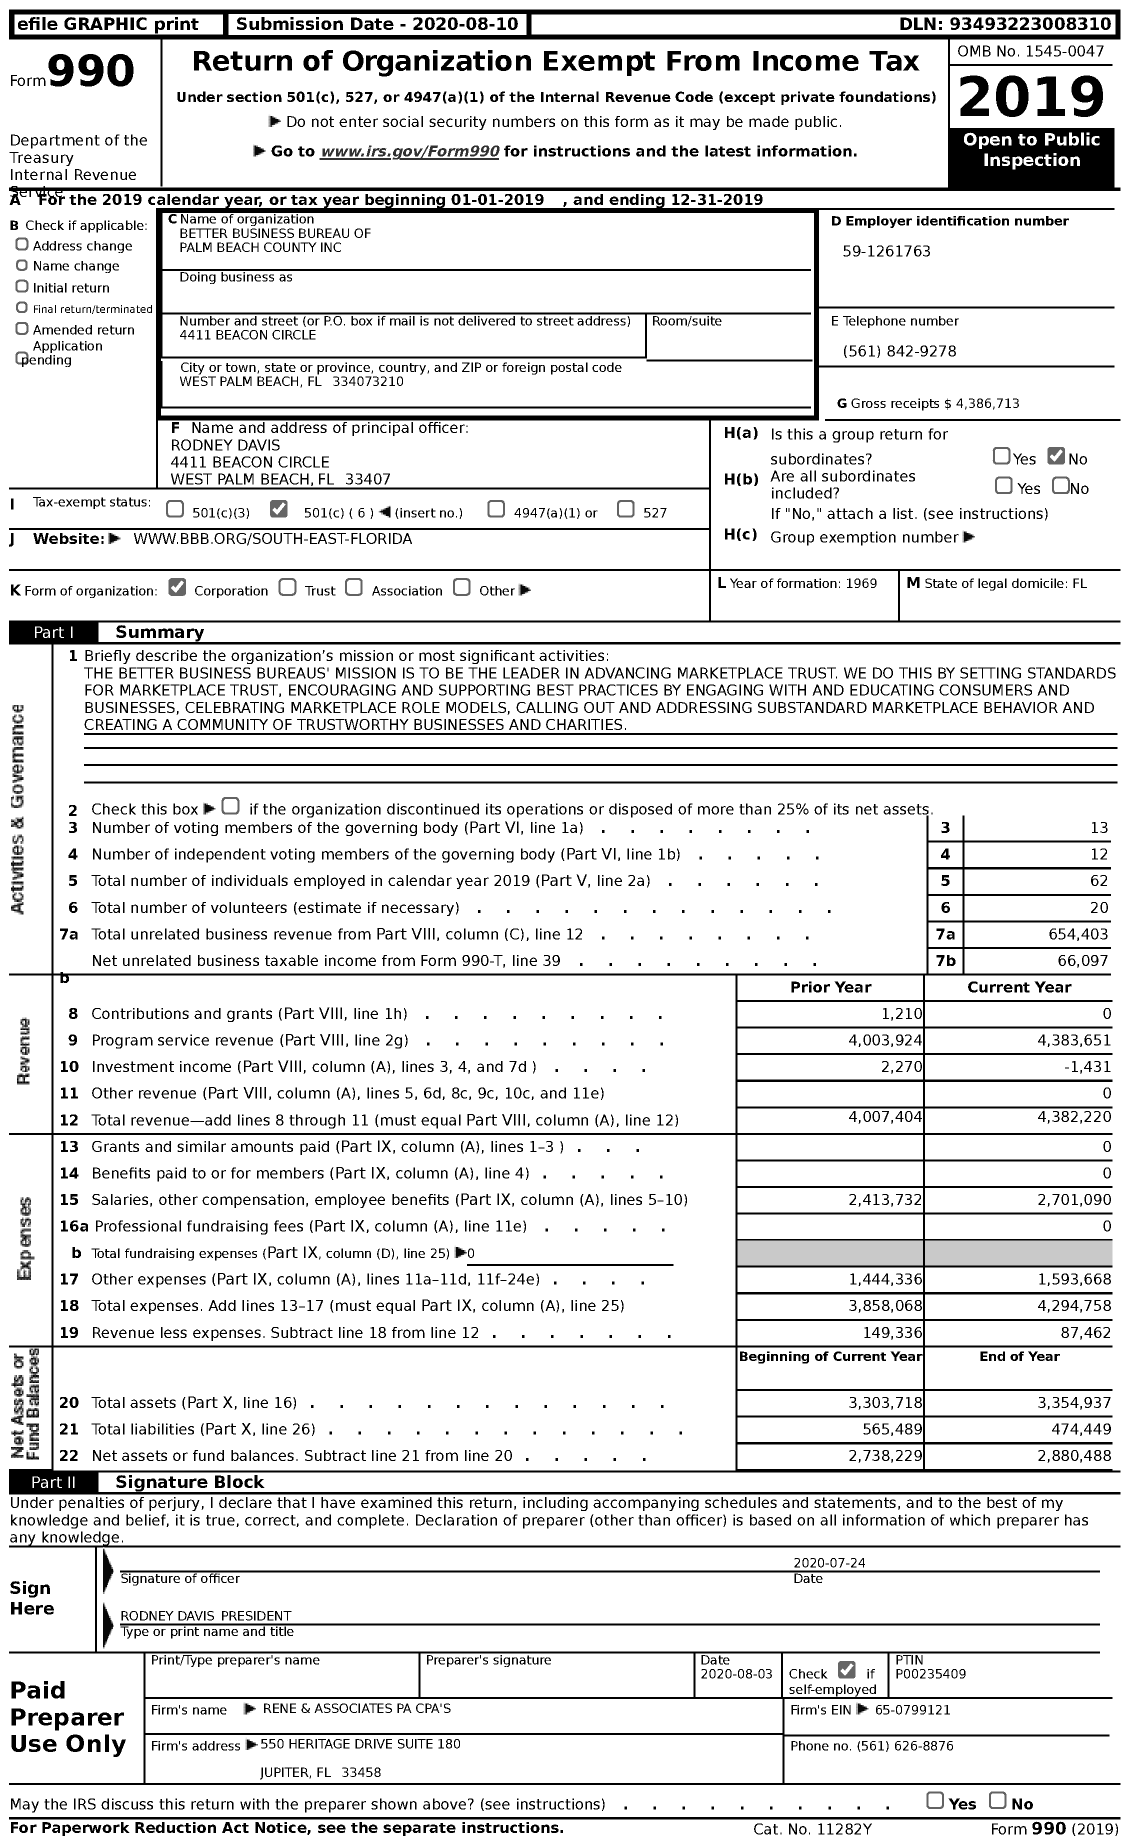 Image of first page of 2019 Form 990 for Better Business Bureau of Palm Beach County (BBB)